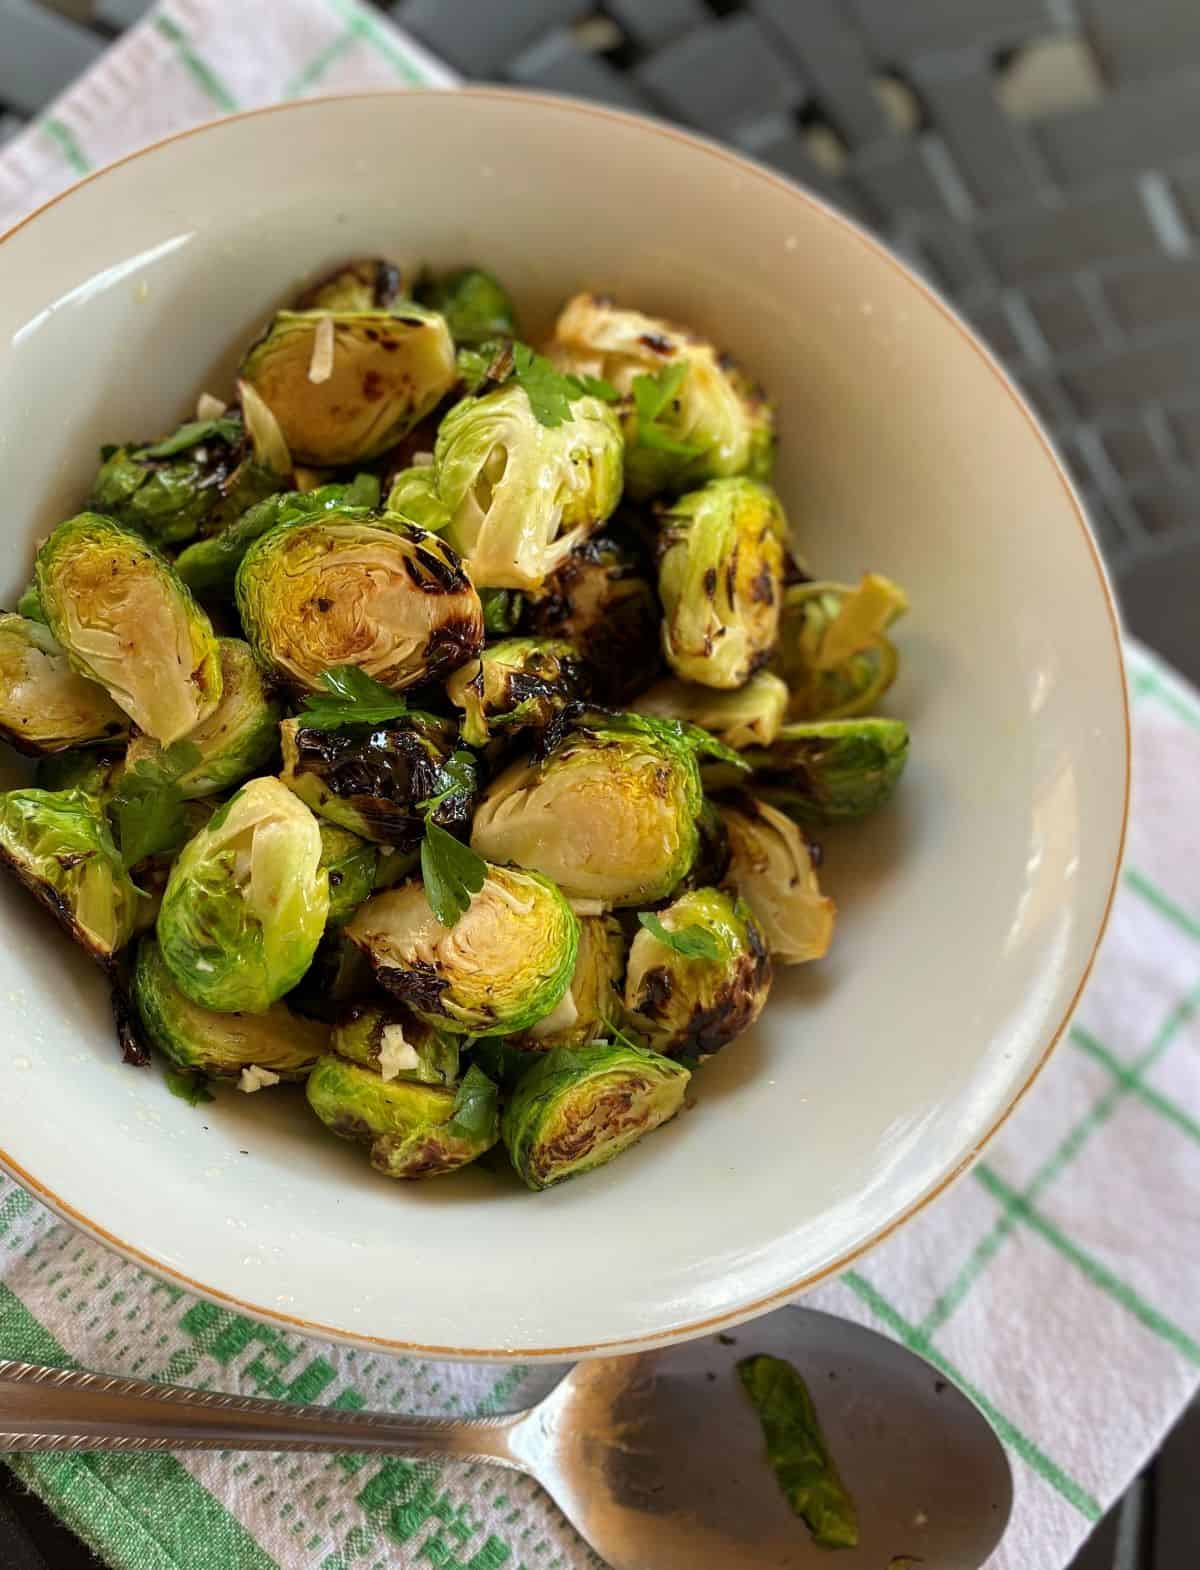 brussel sprouts in a white bowl on patio table